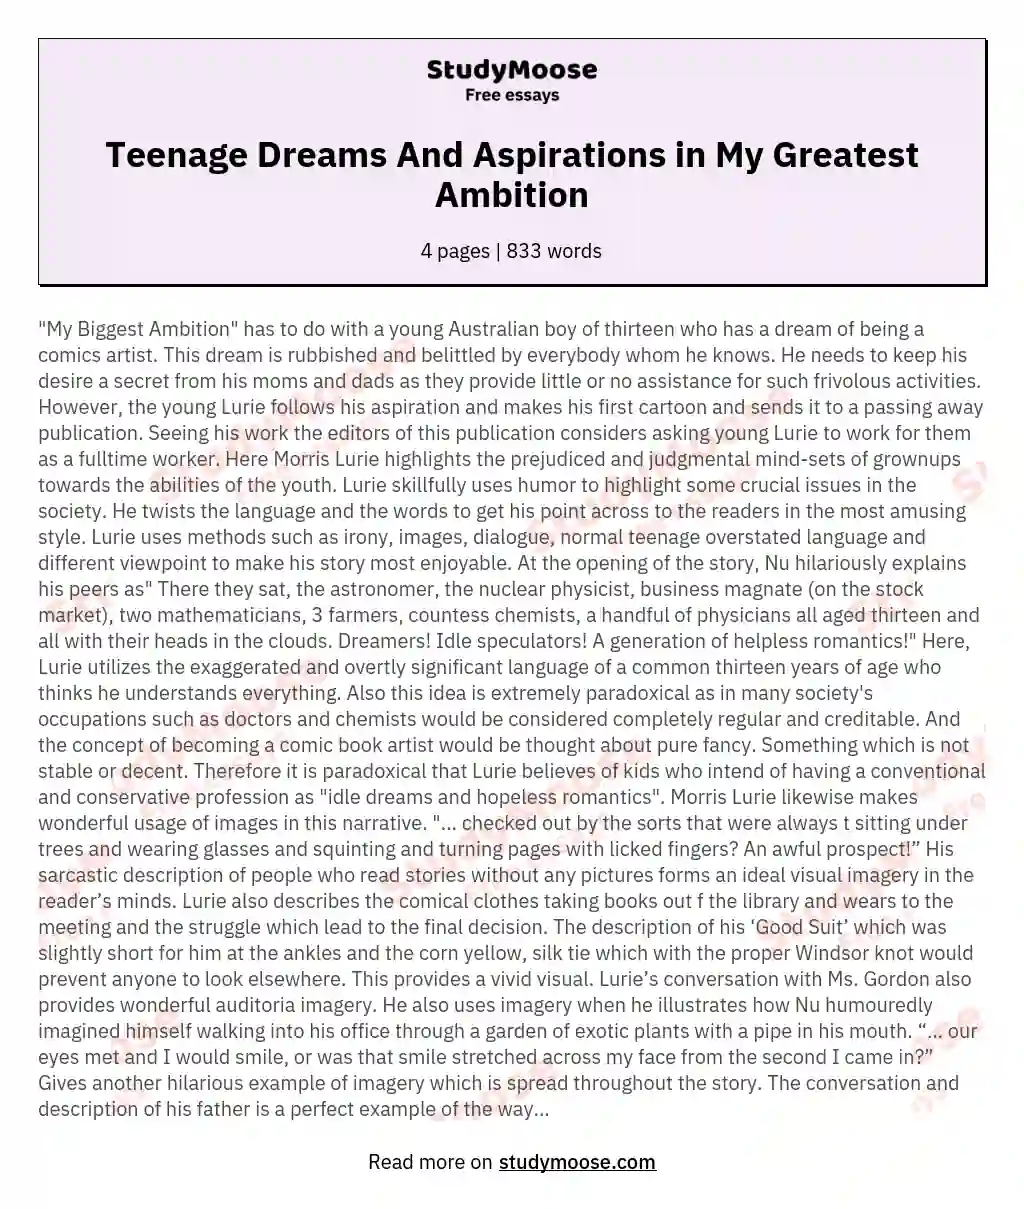 Teenage Dreams And Aspirations in My Greatest Ambition